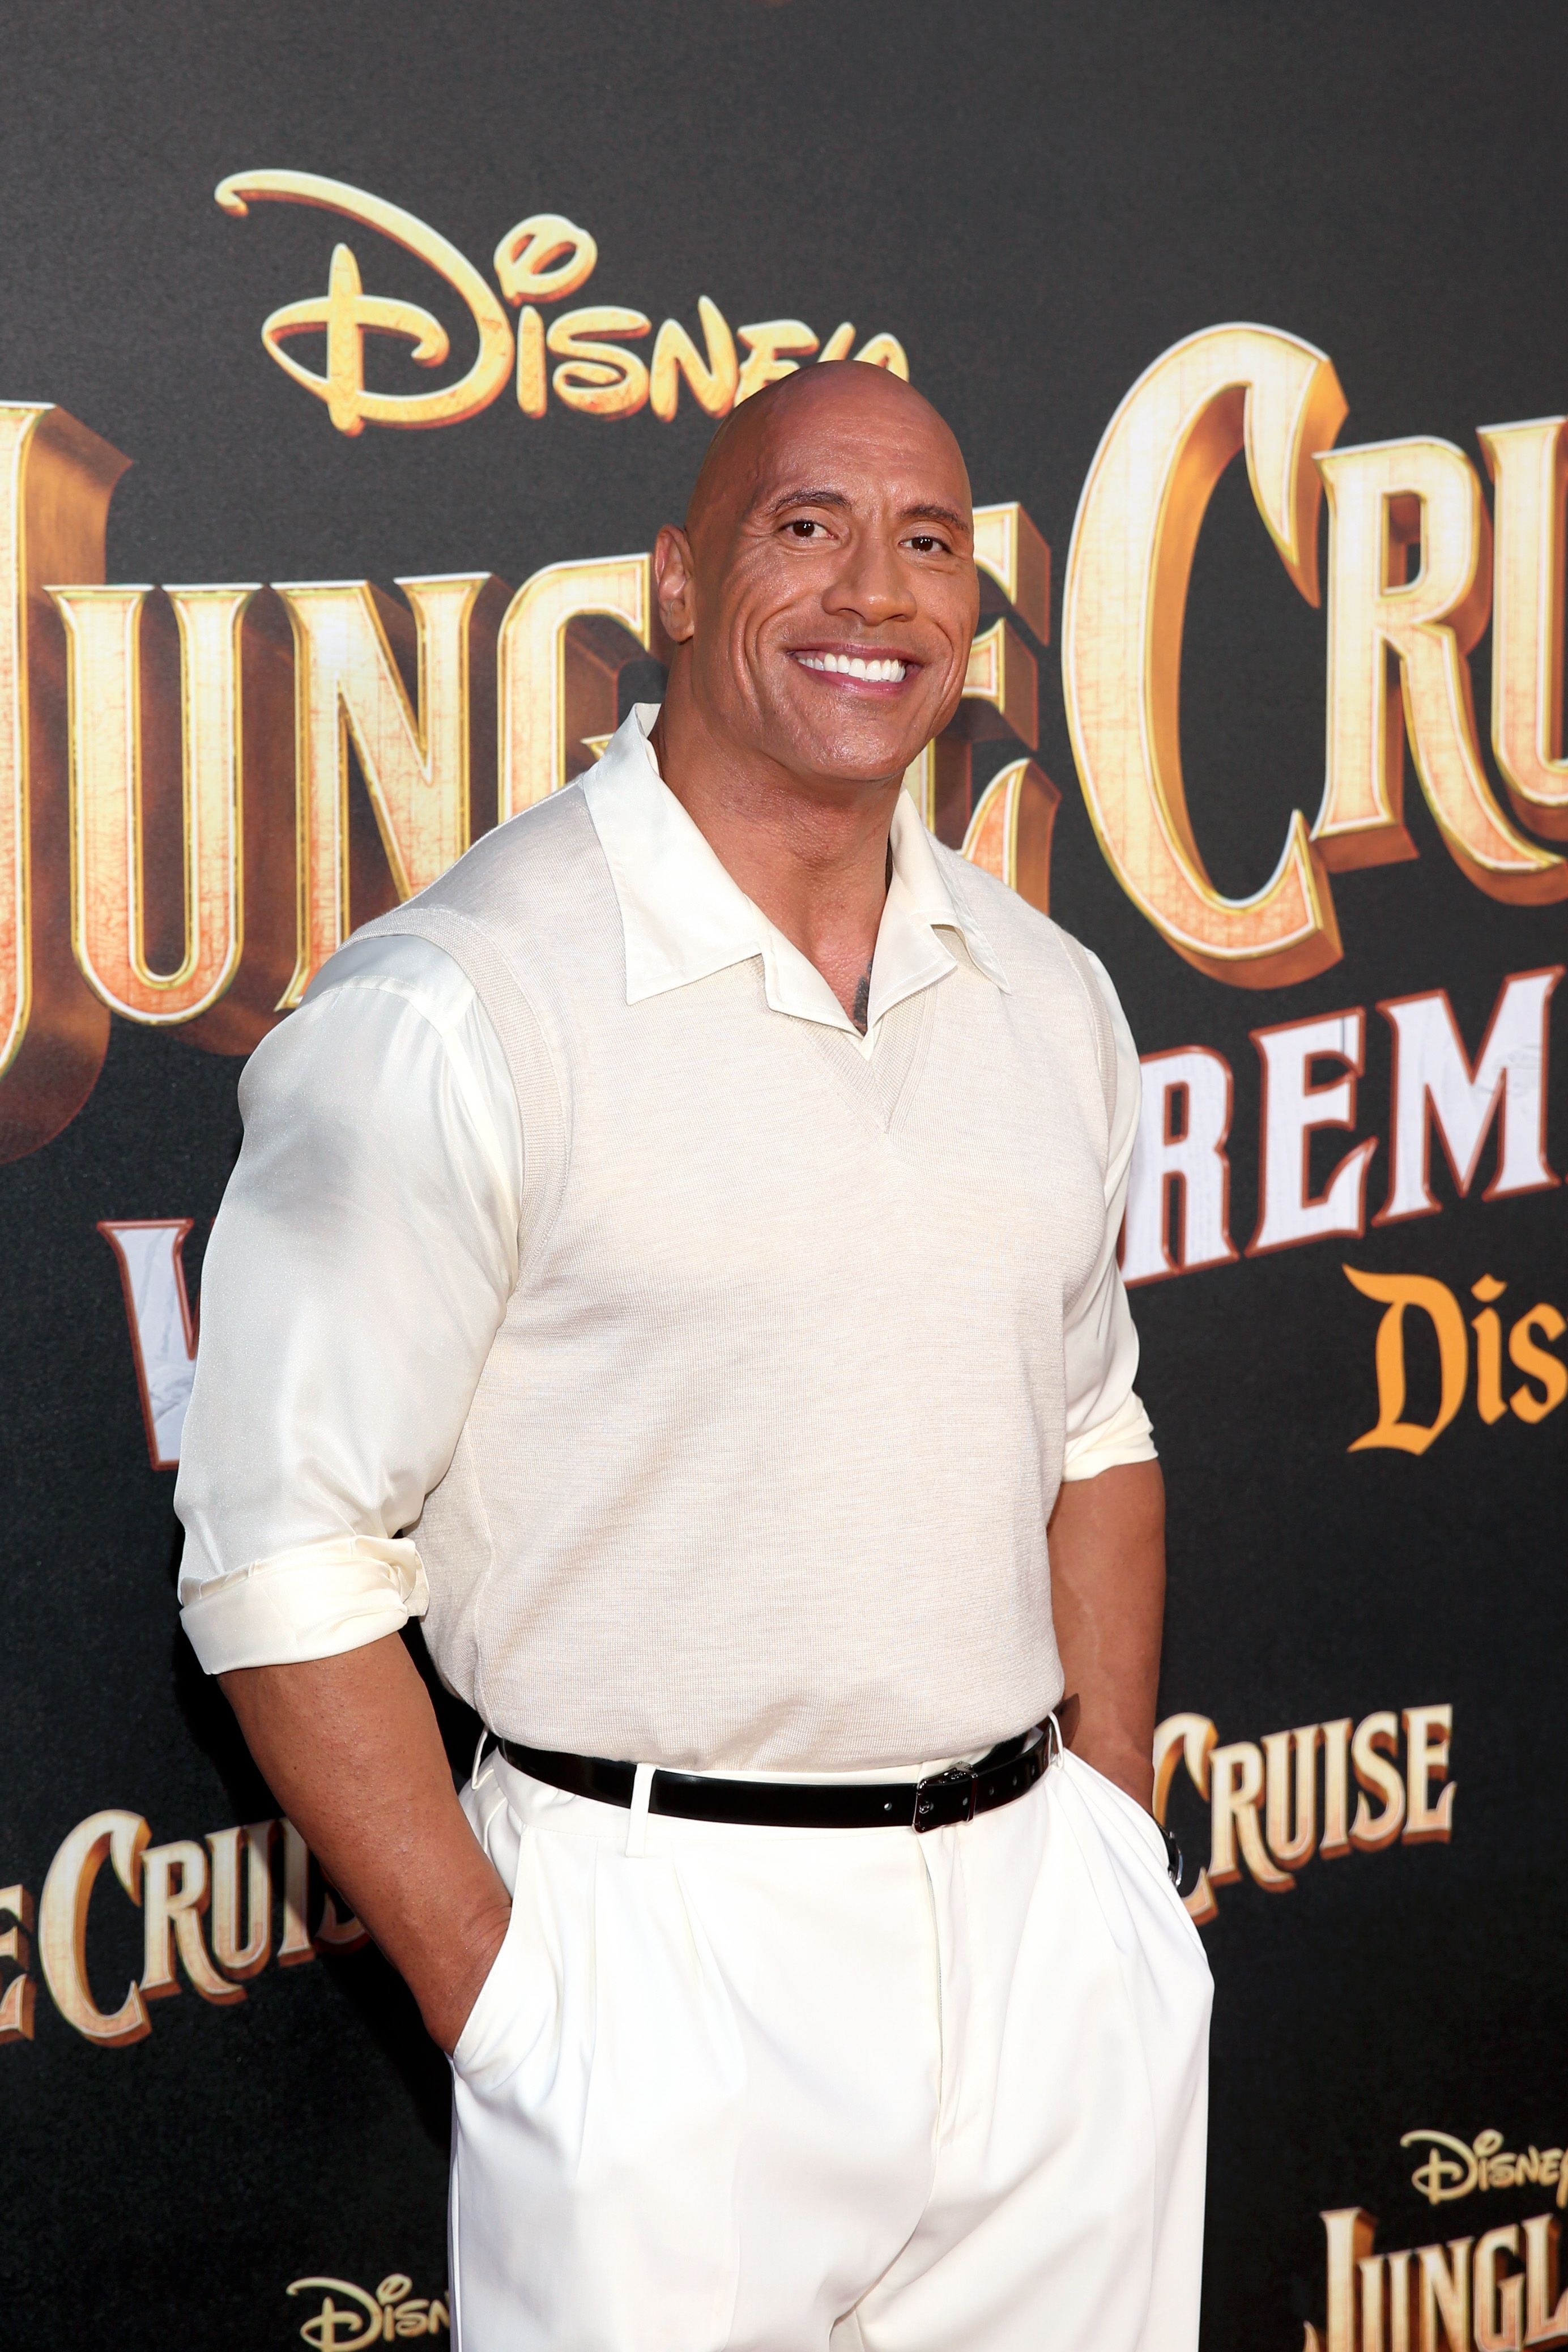 Dwayne Johnson, posing on the red carpet for the premier of his new movie, Jungle Cruise.